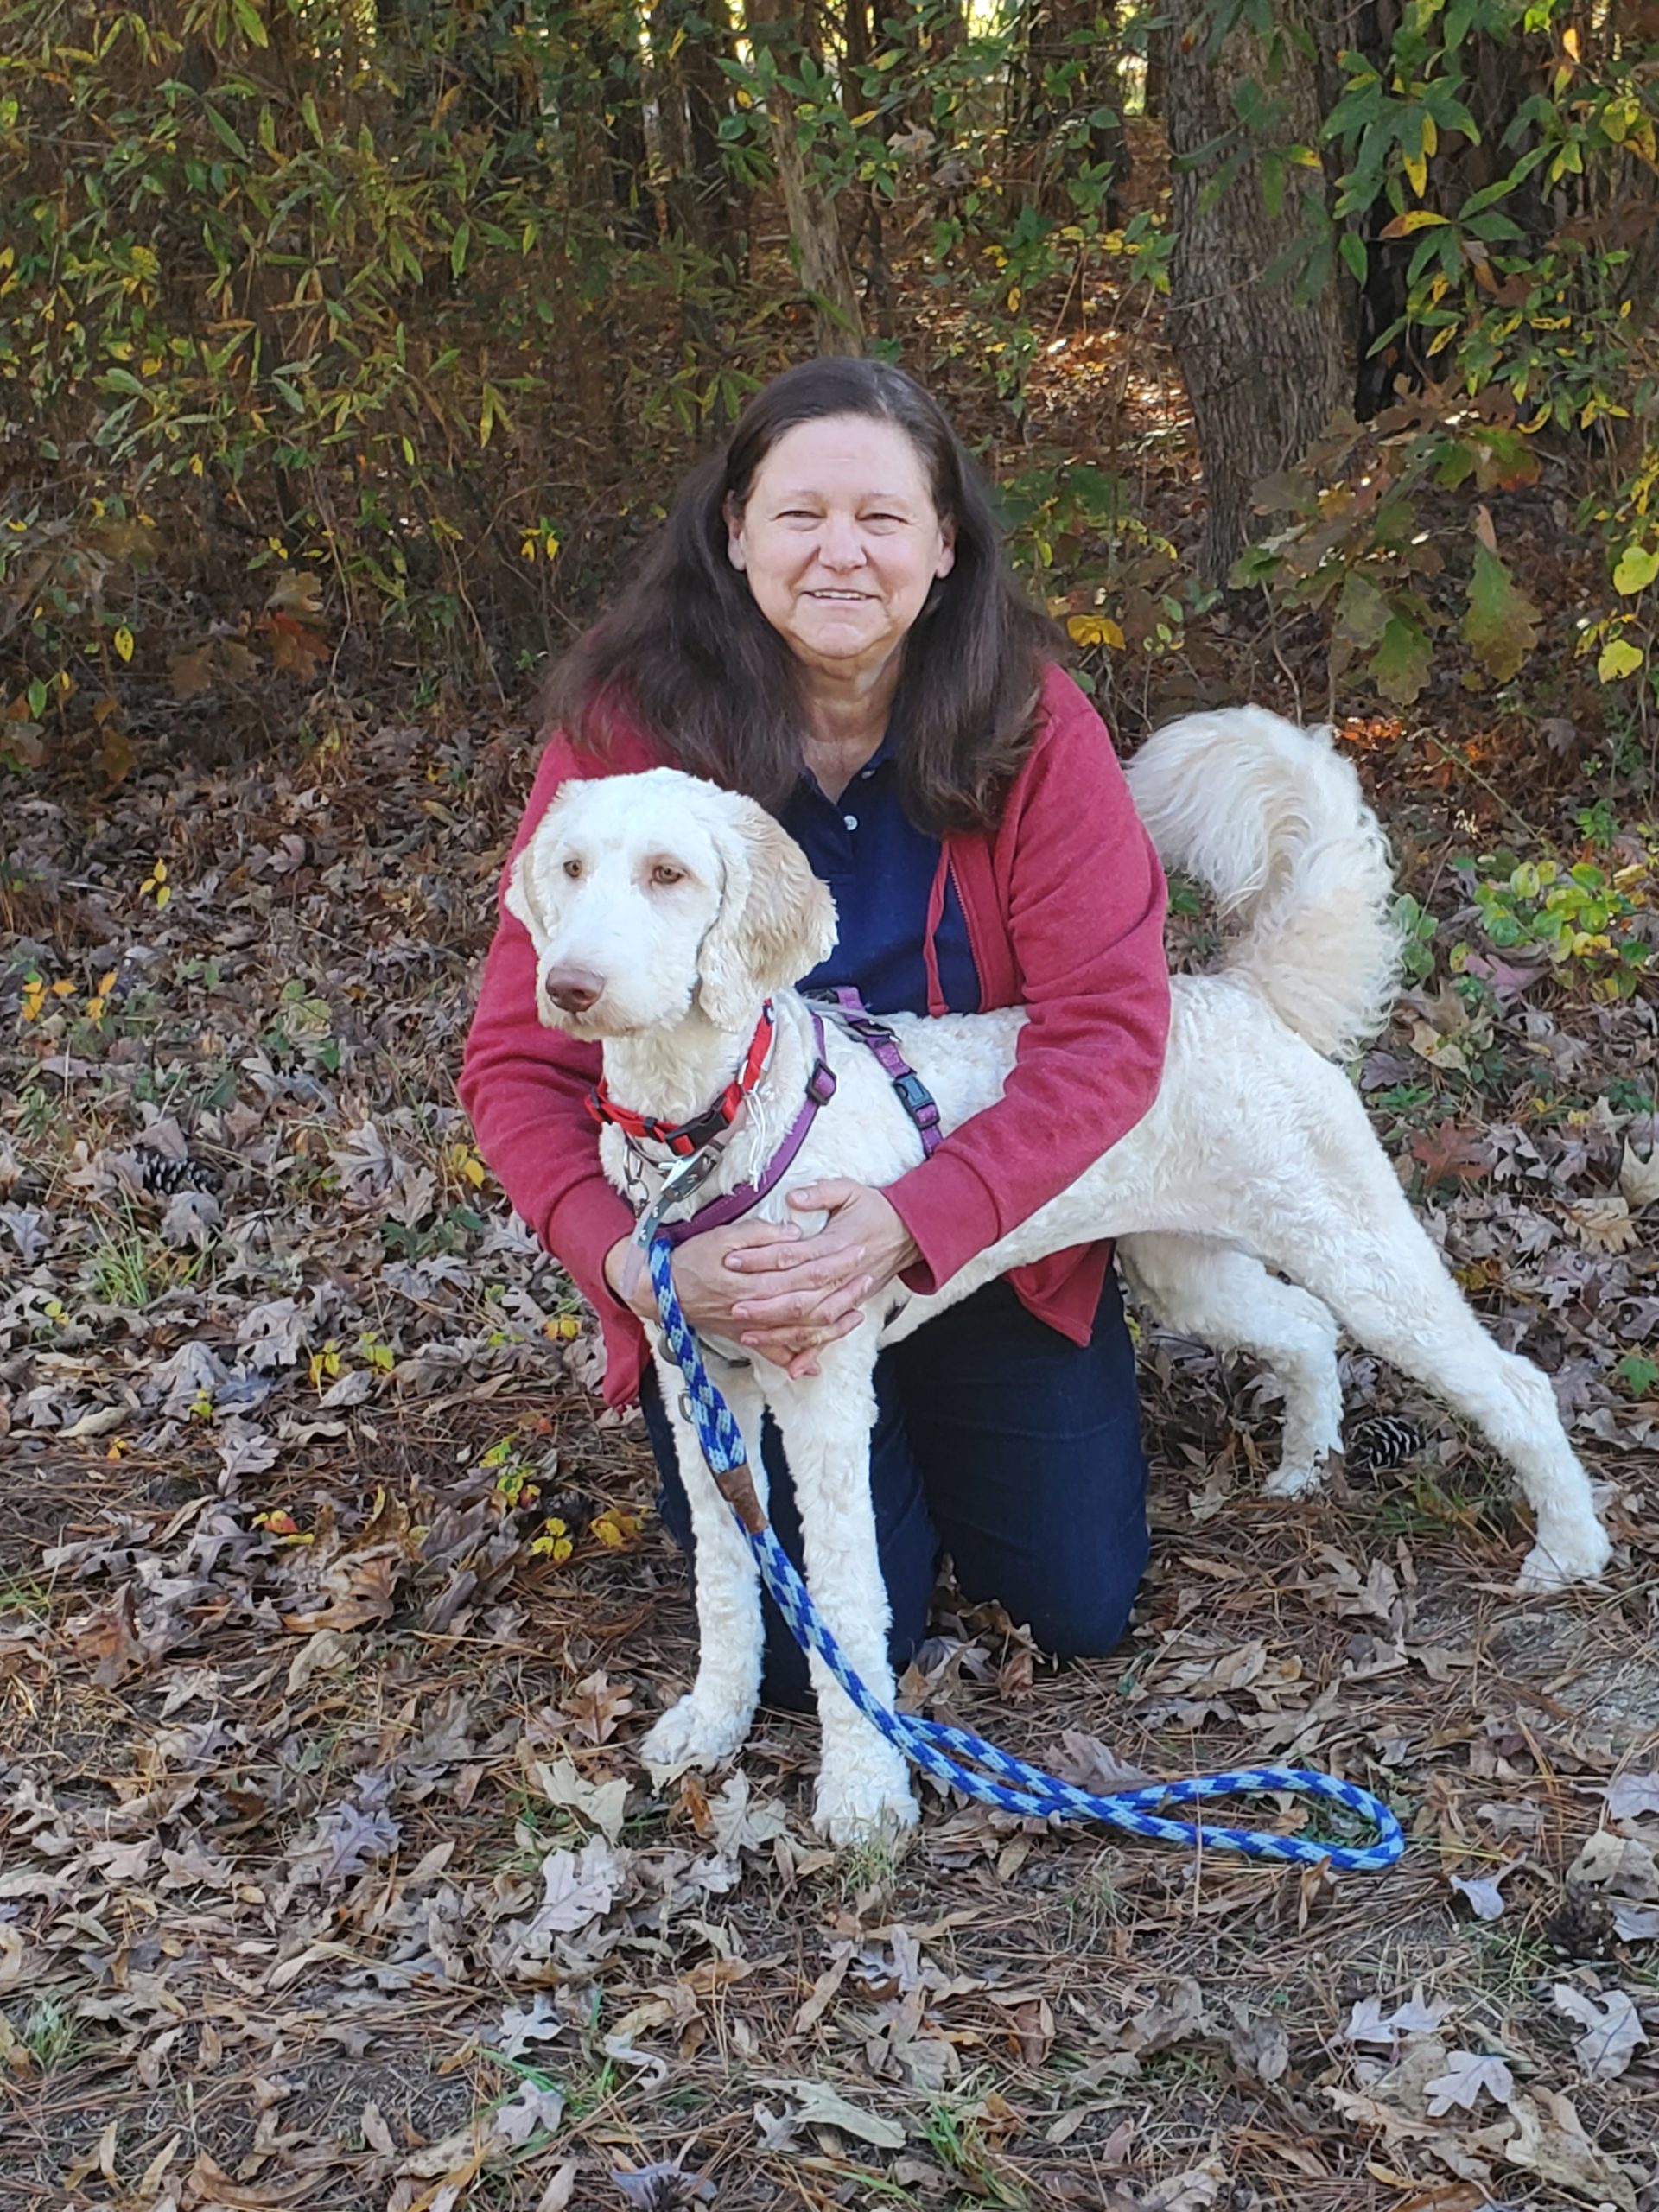 Dog trainer smiling and kneeling with her arms around a dog that is standing in front of her.